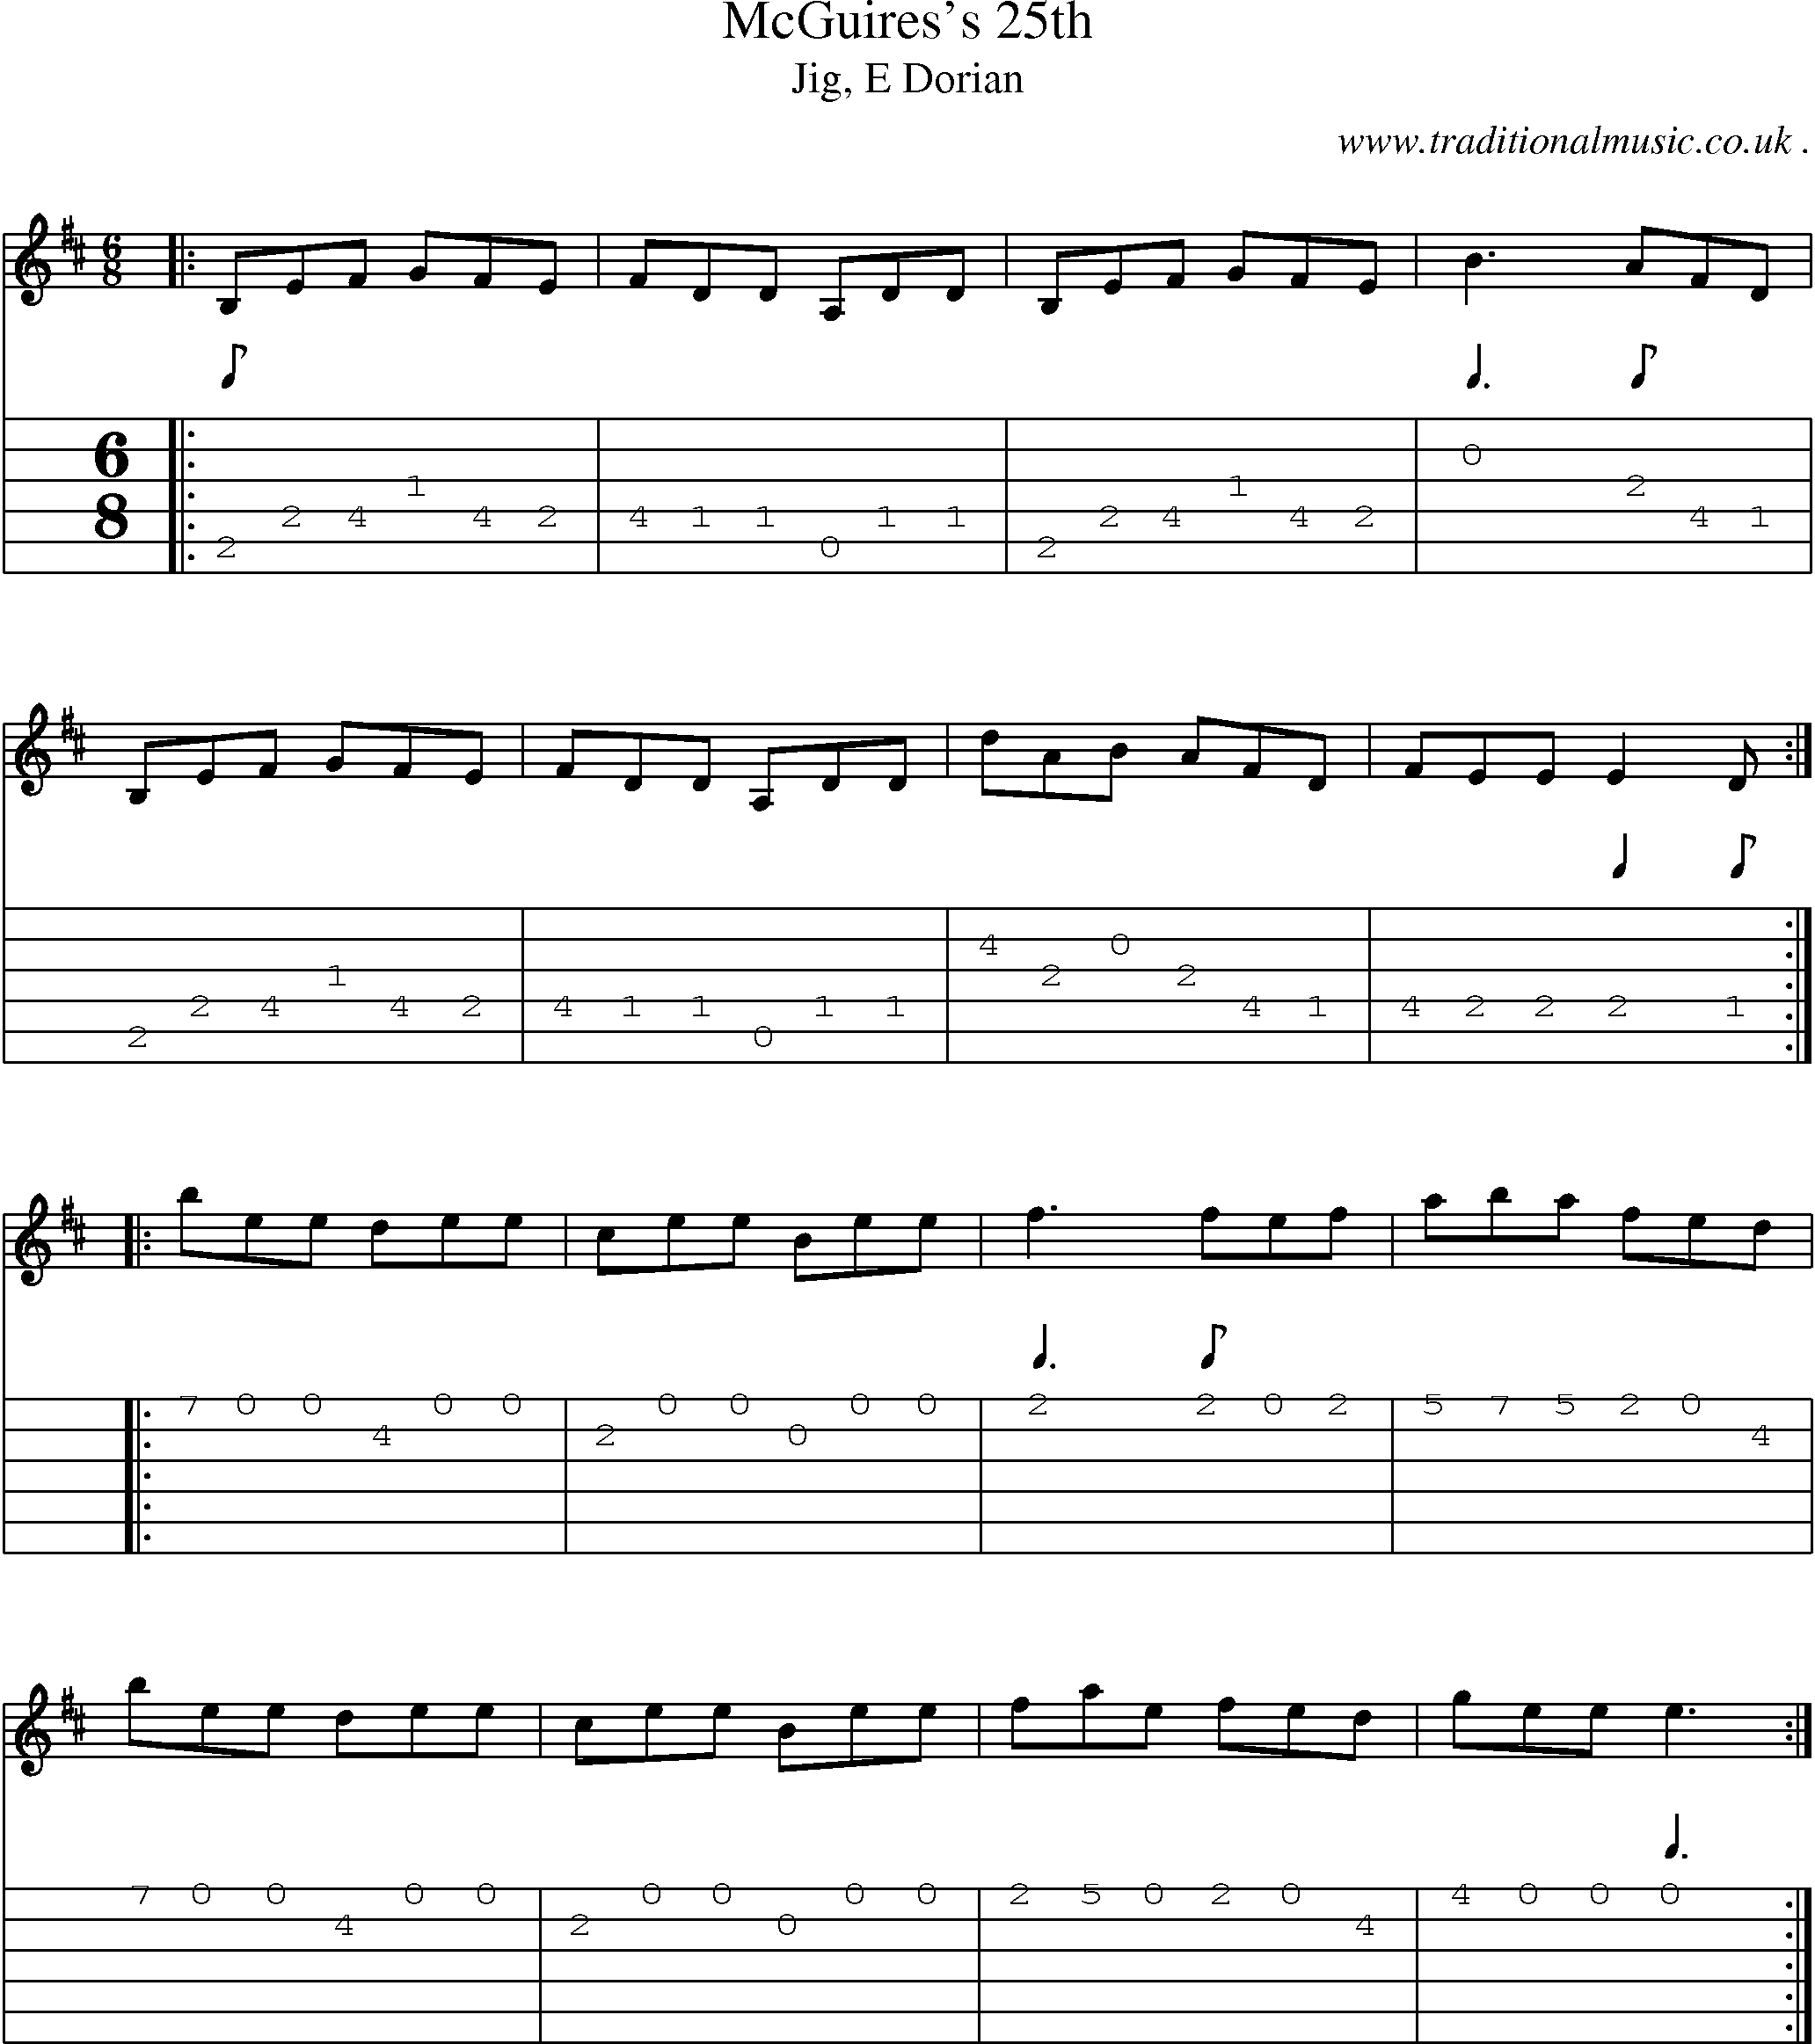 Sheet-music  score, Chords and Guitar Tabs for Mcguiress 25th